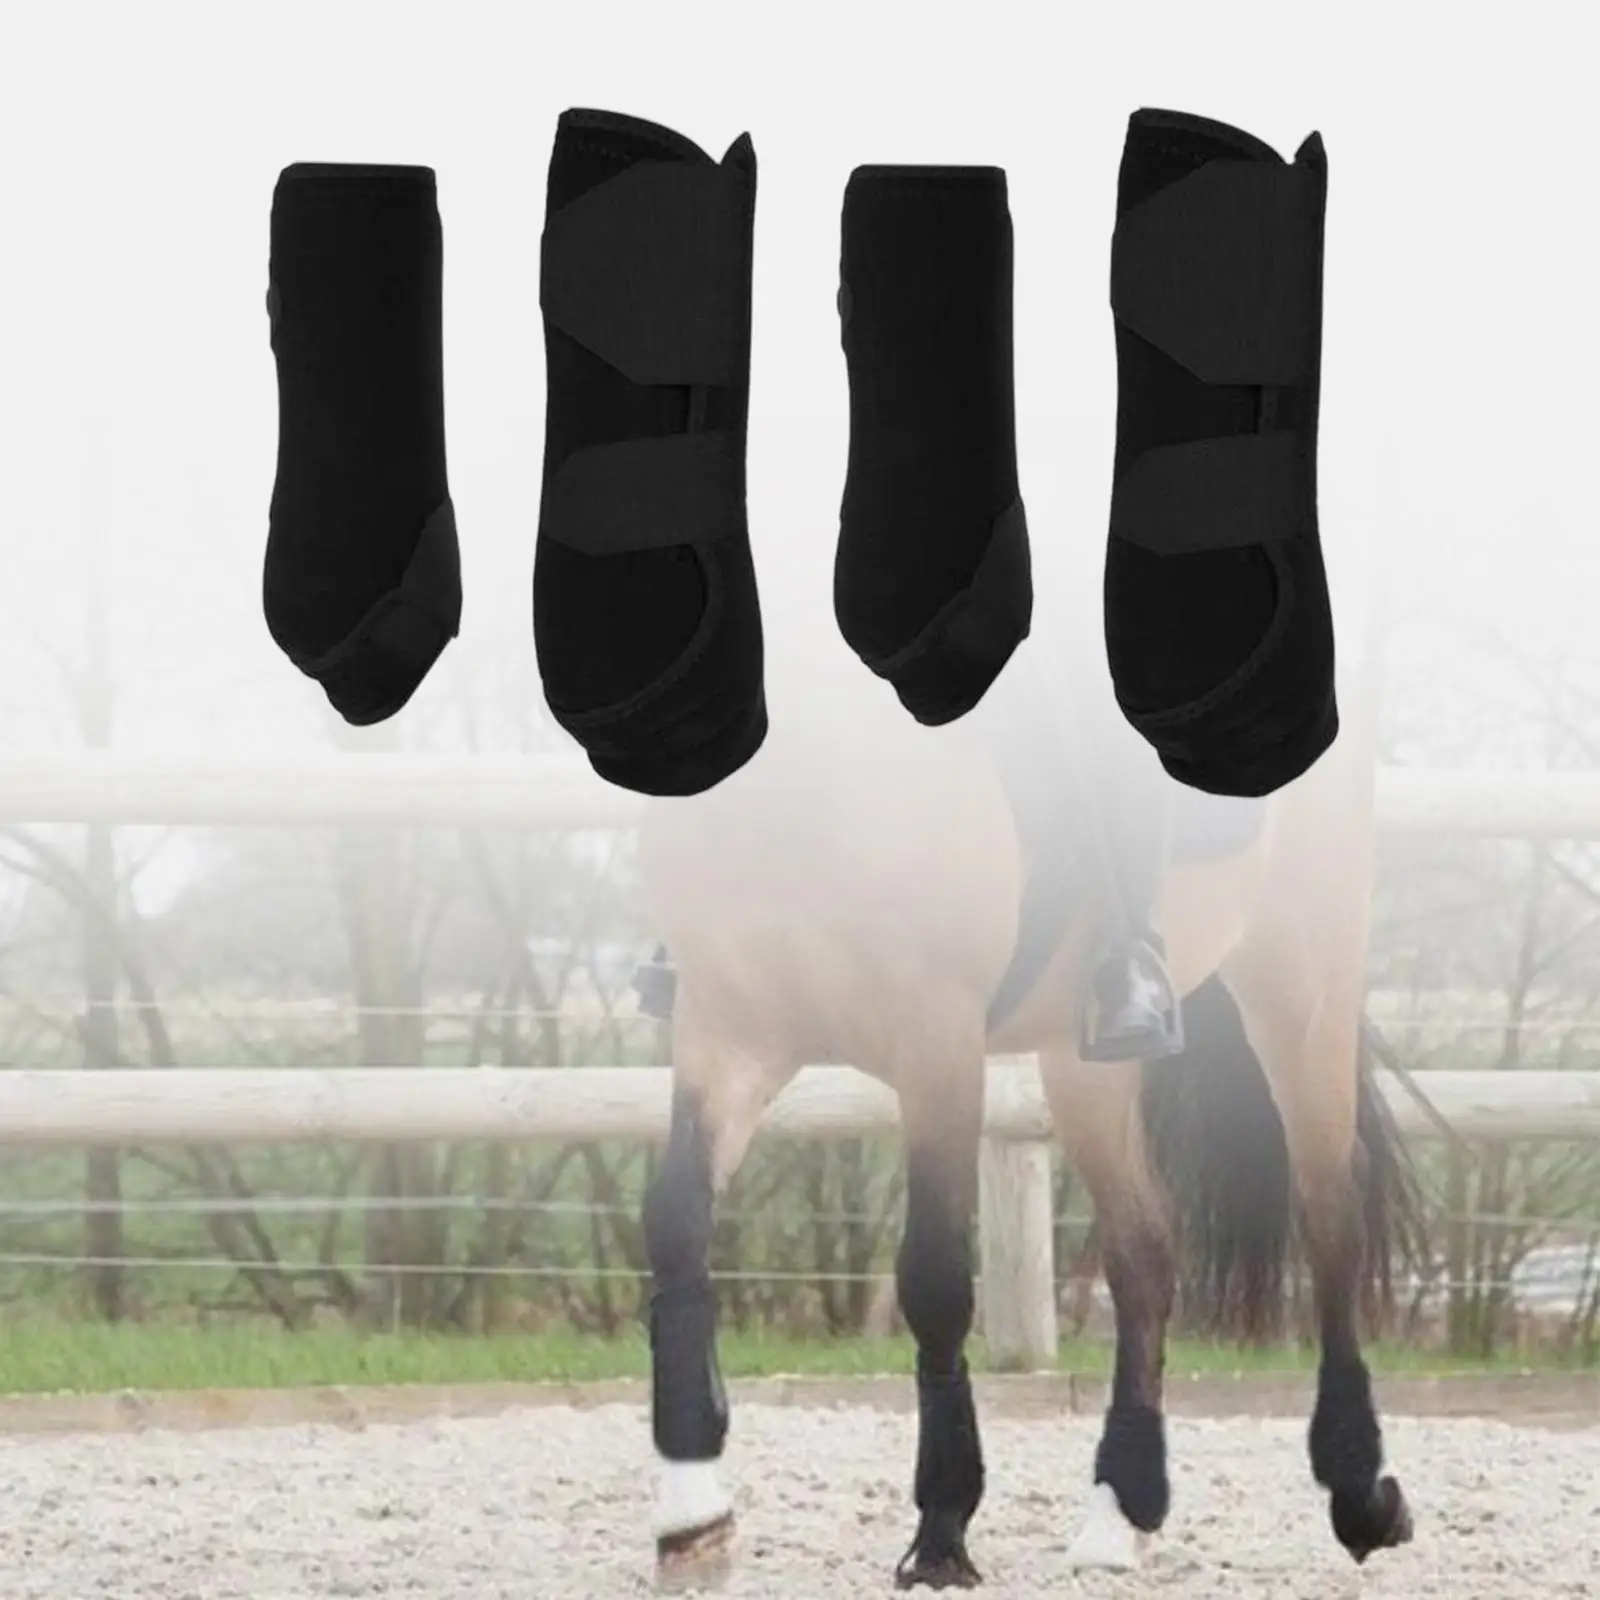 4x Neoprene Horse Boots Leg Protection Wraps Shockproof Protector Tendon Protection Leg Guard Equestrian Accessories